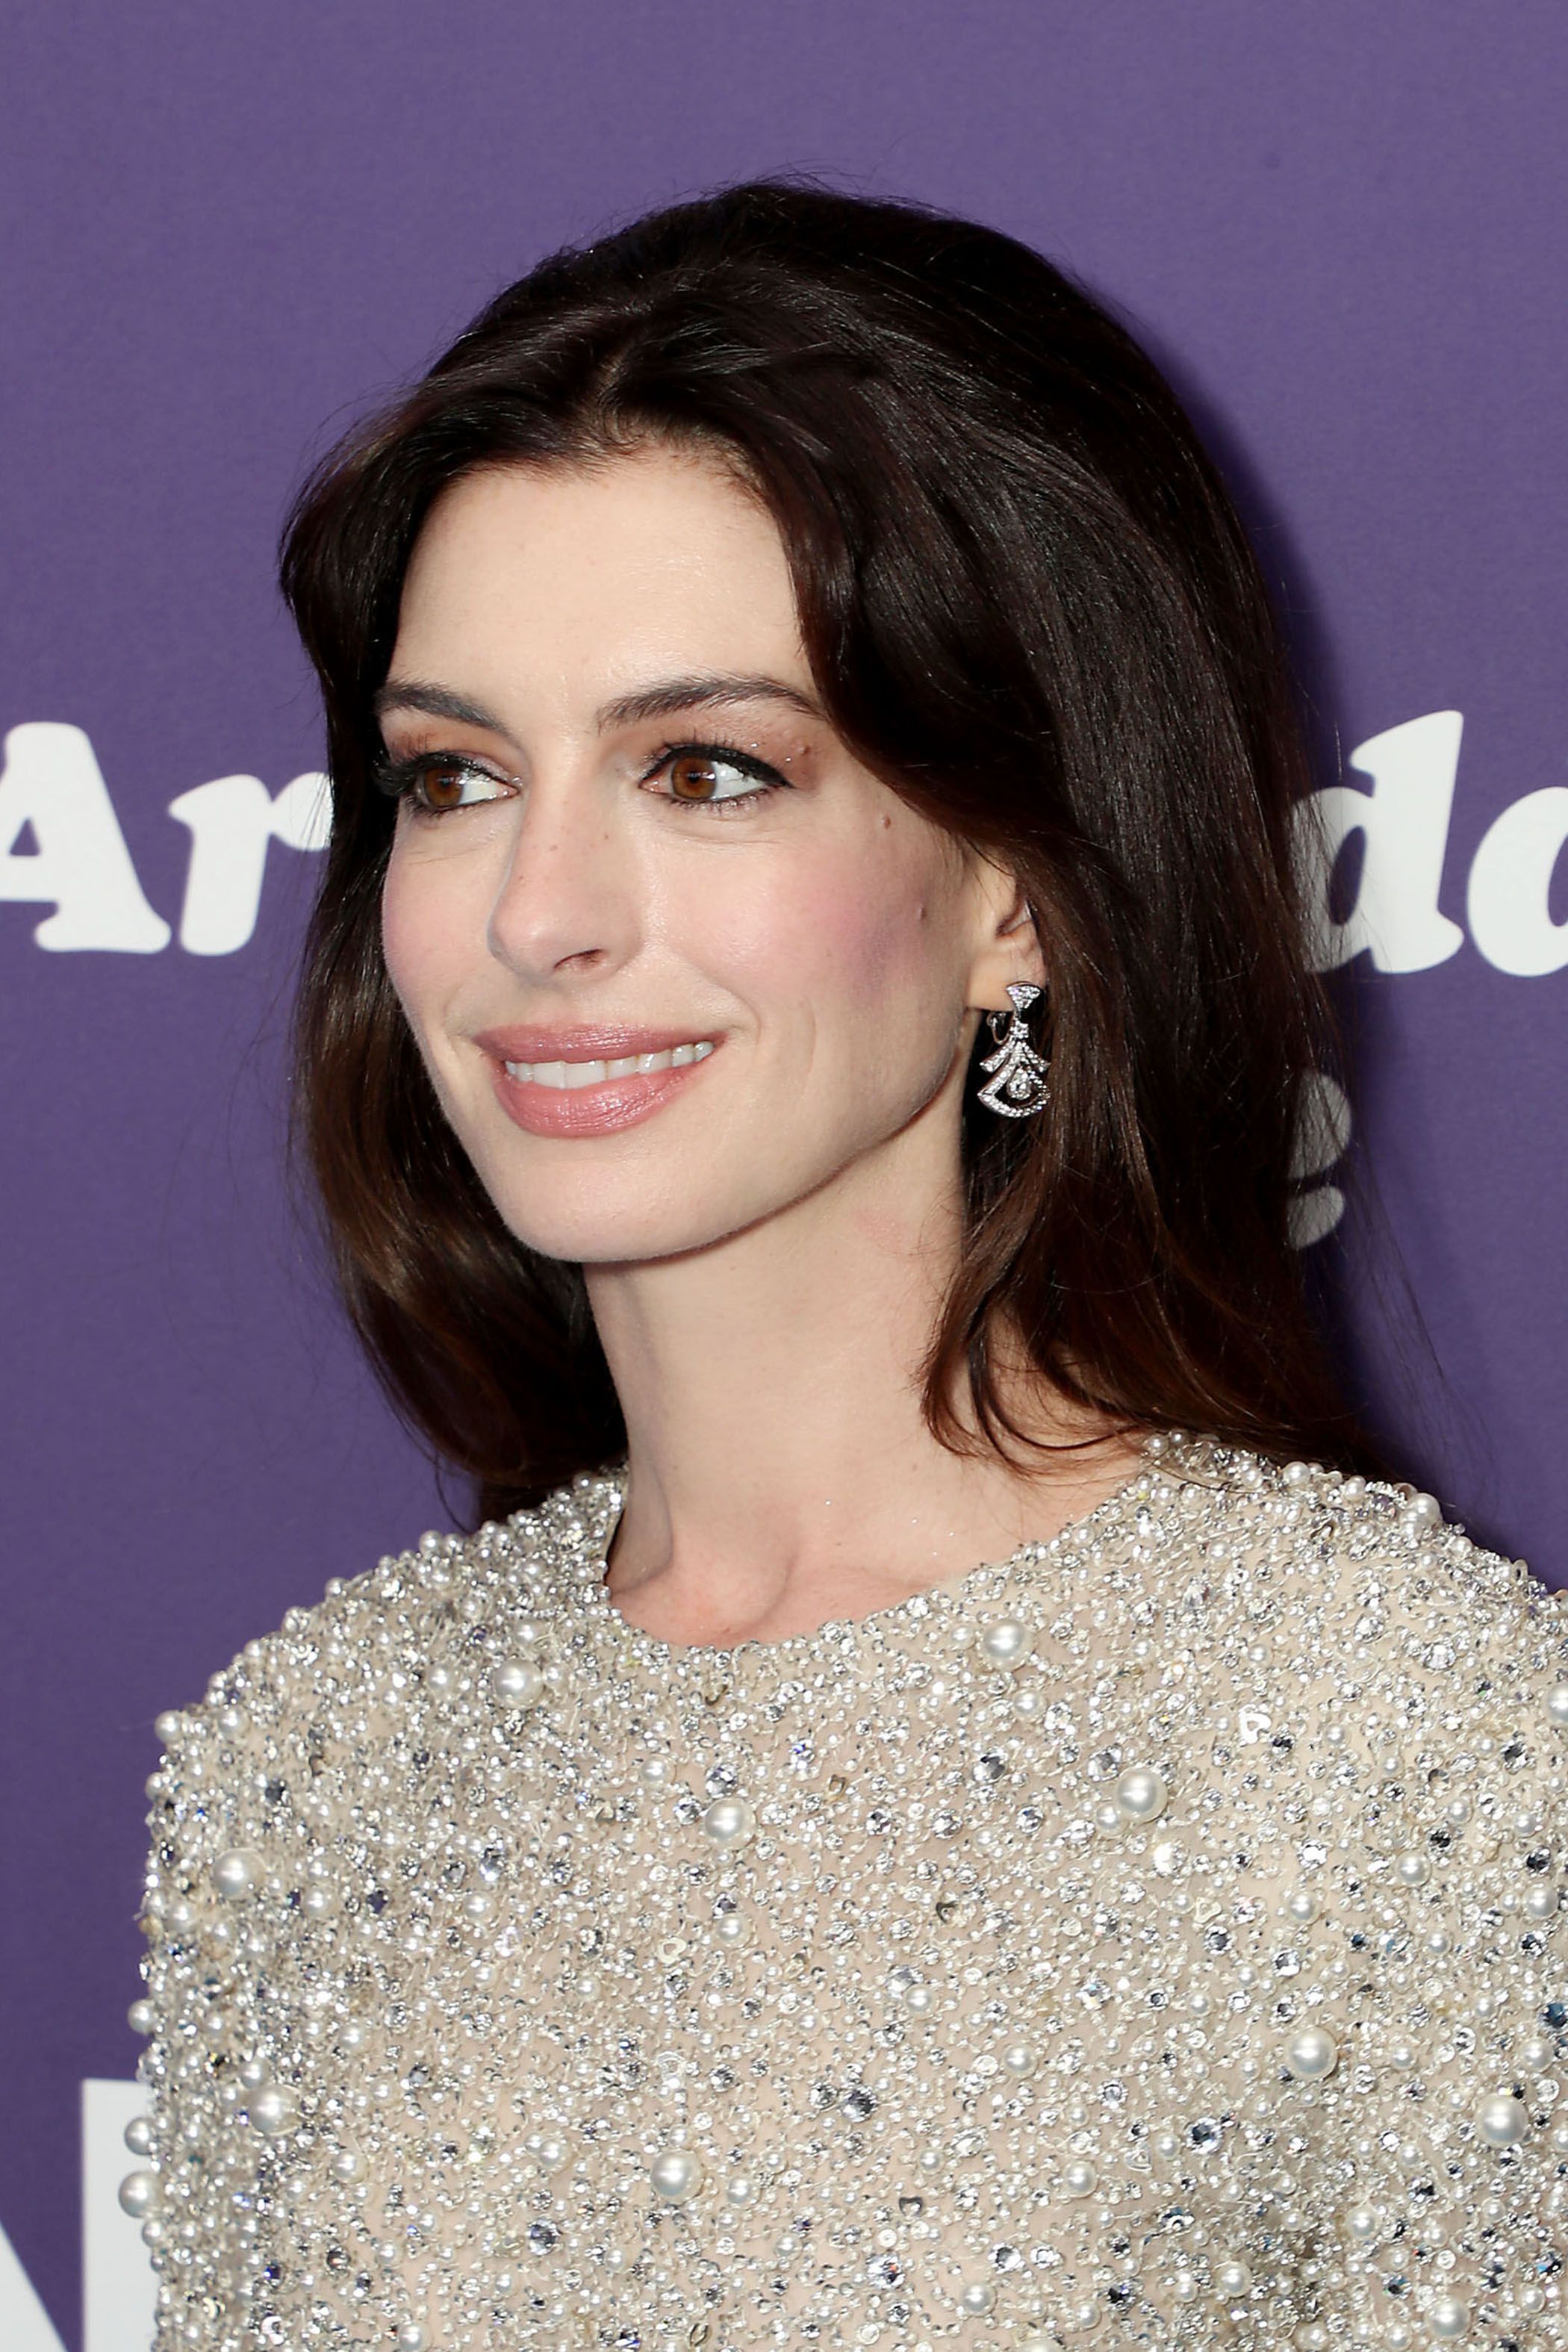 Anne Hathaway Was A Nightmare To Deal With For The On-Set Chef, Sending ...